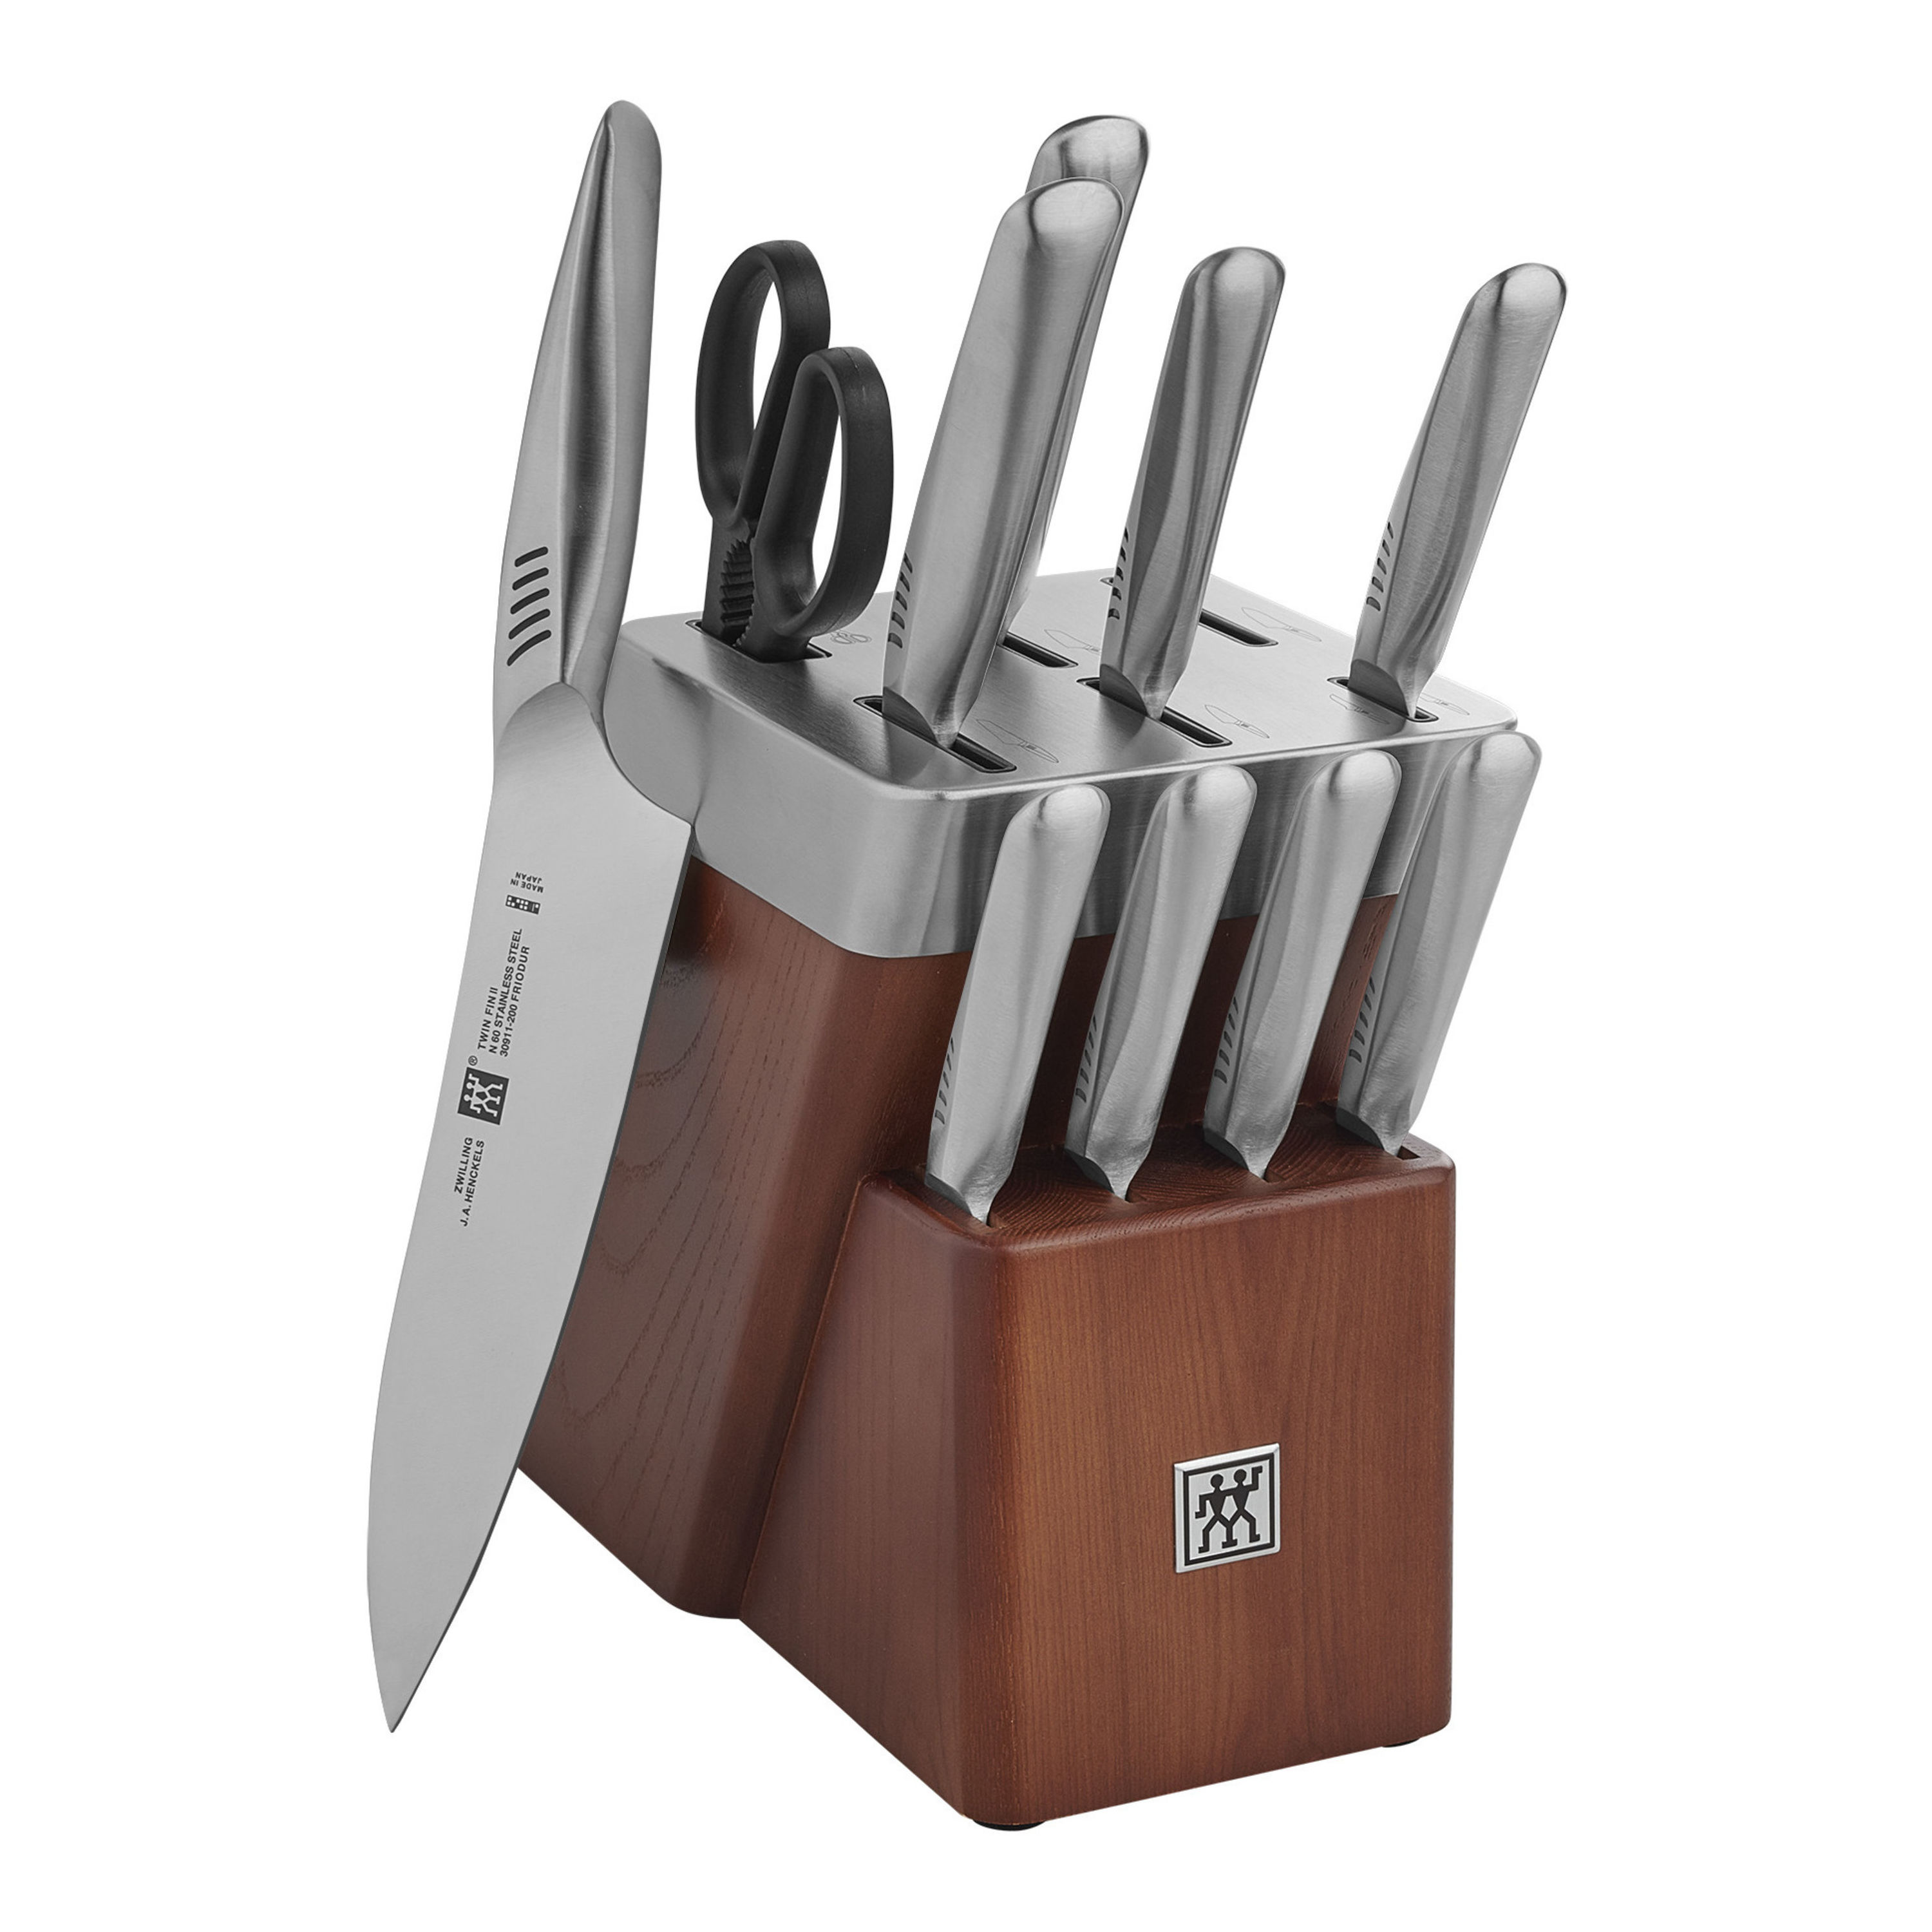 https://www.zwilling.com/on/demandware.static/-/Sites-zwilling-master-catalog/default/dw1b0a5b8e/images/large/30920-011_1.jpg